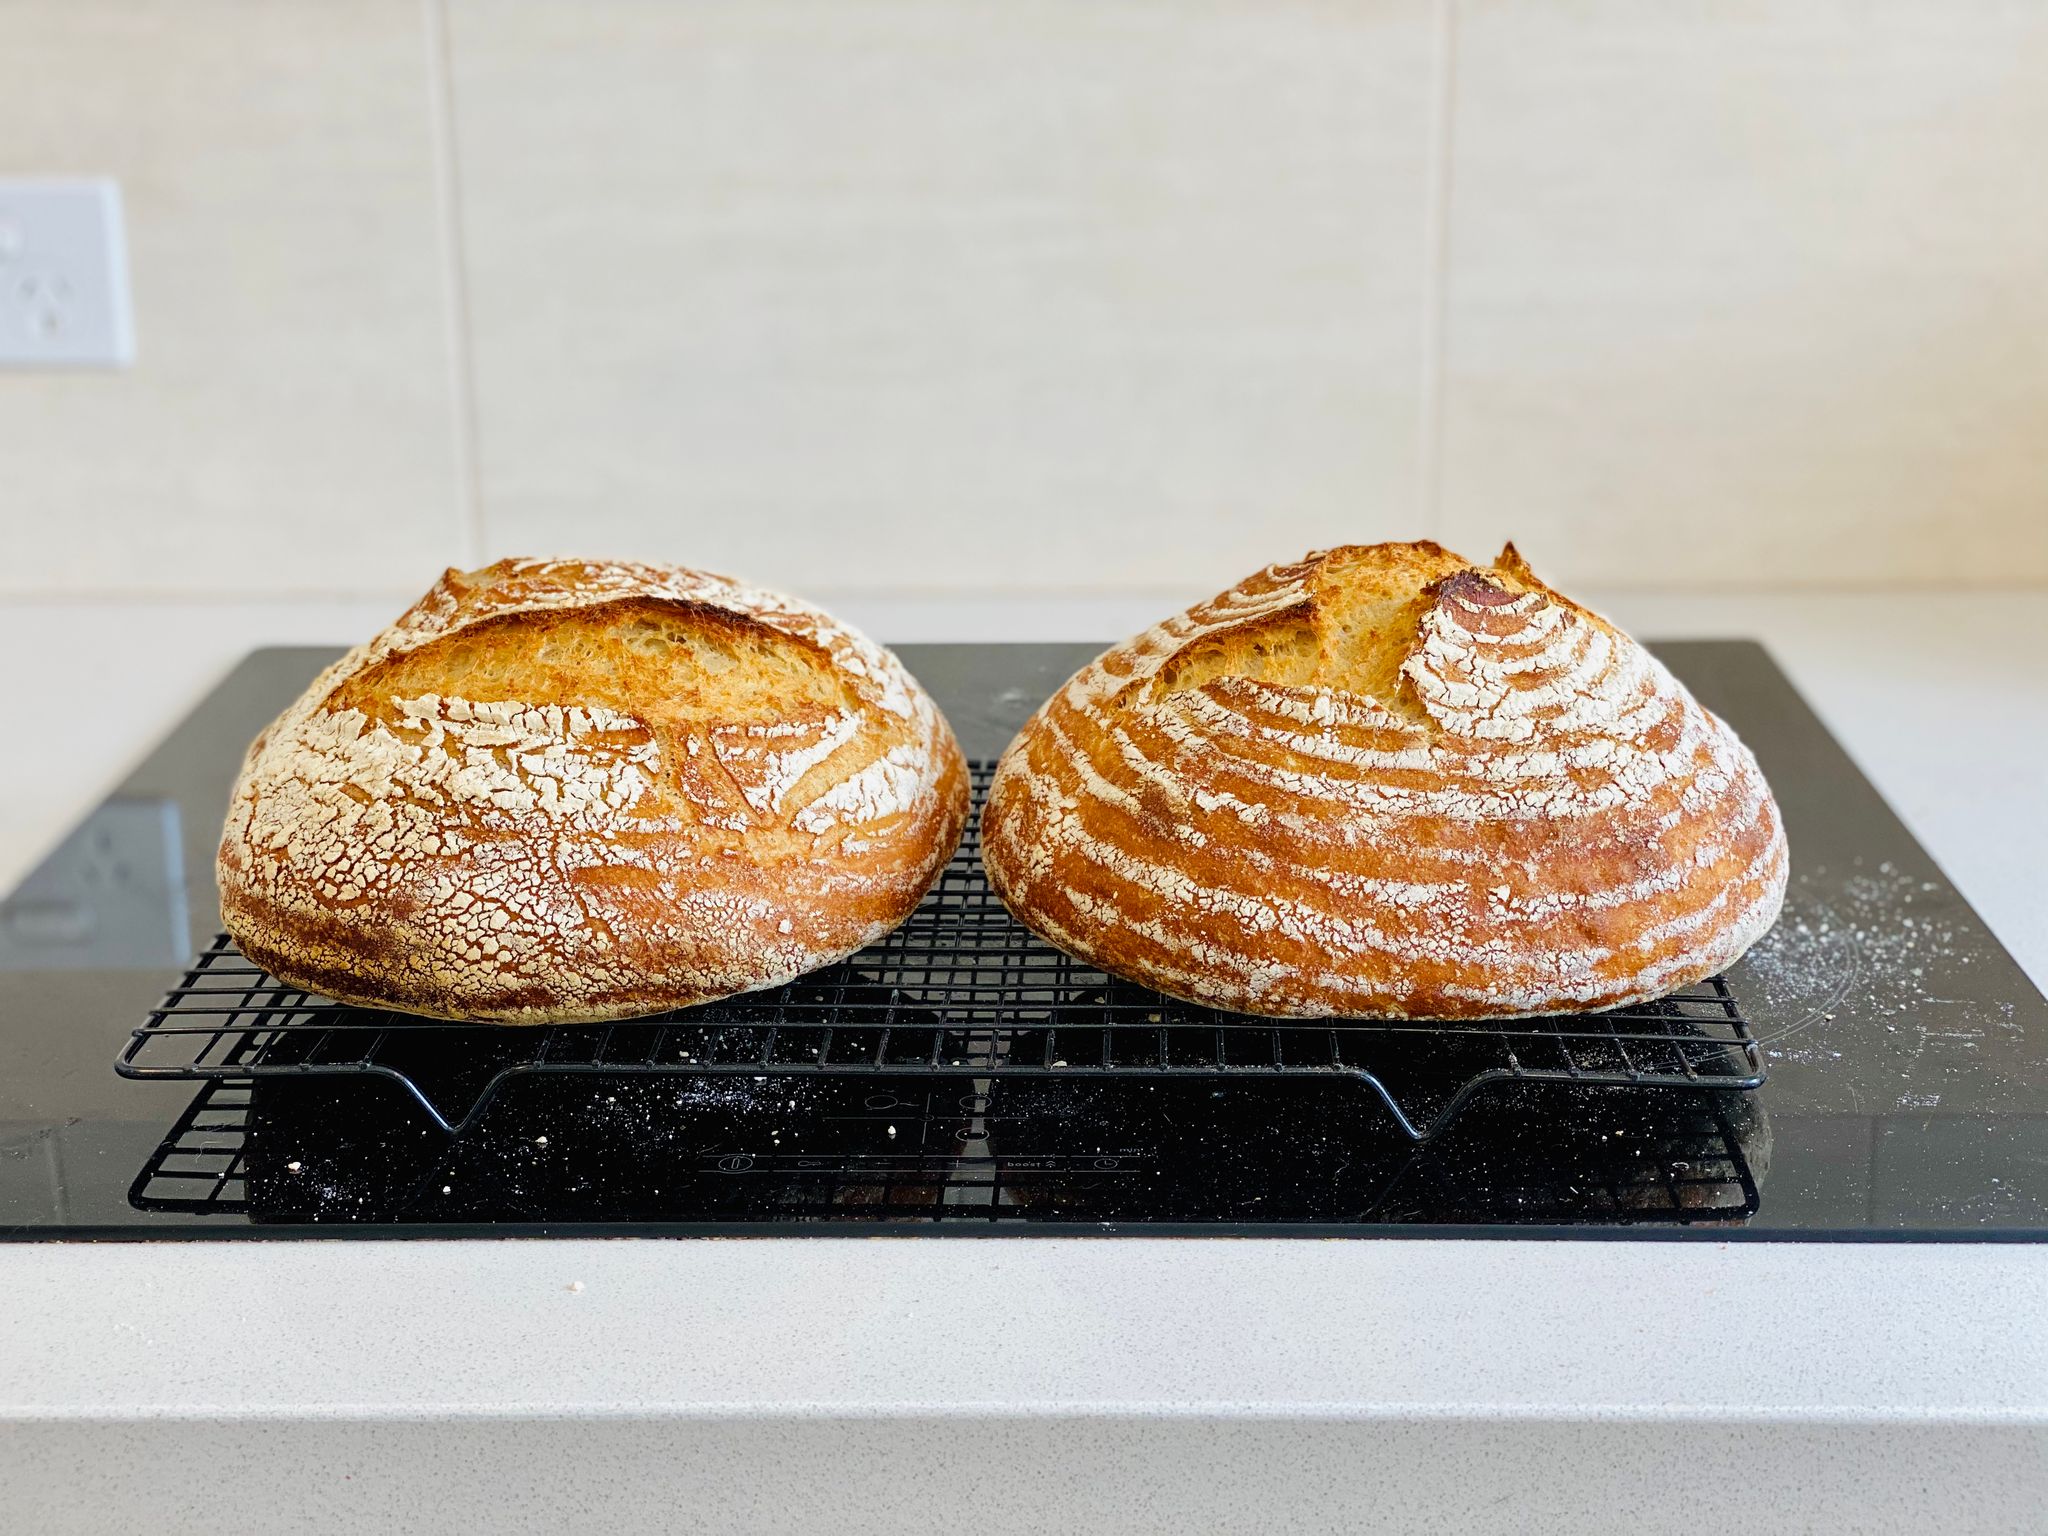 A photo of two round golden brown loaves of bread sitting on a cooling rack.